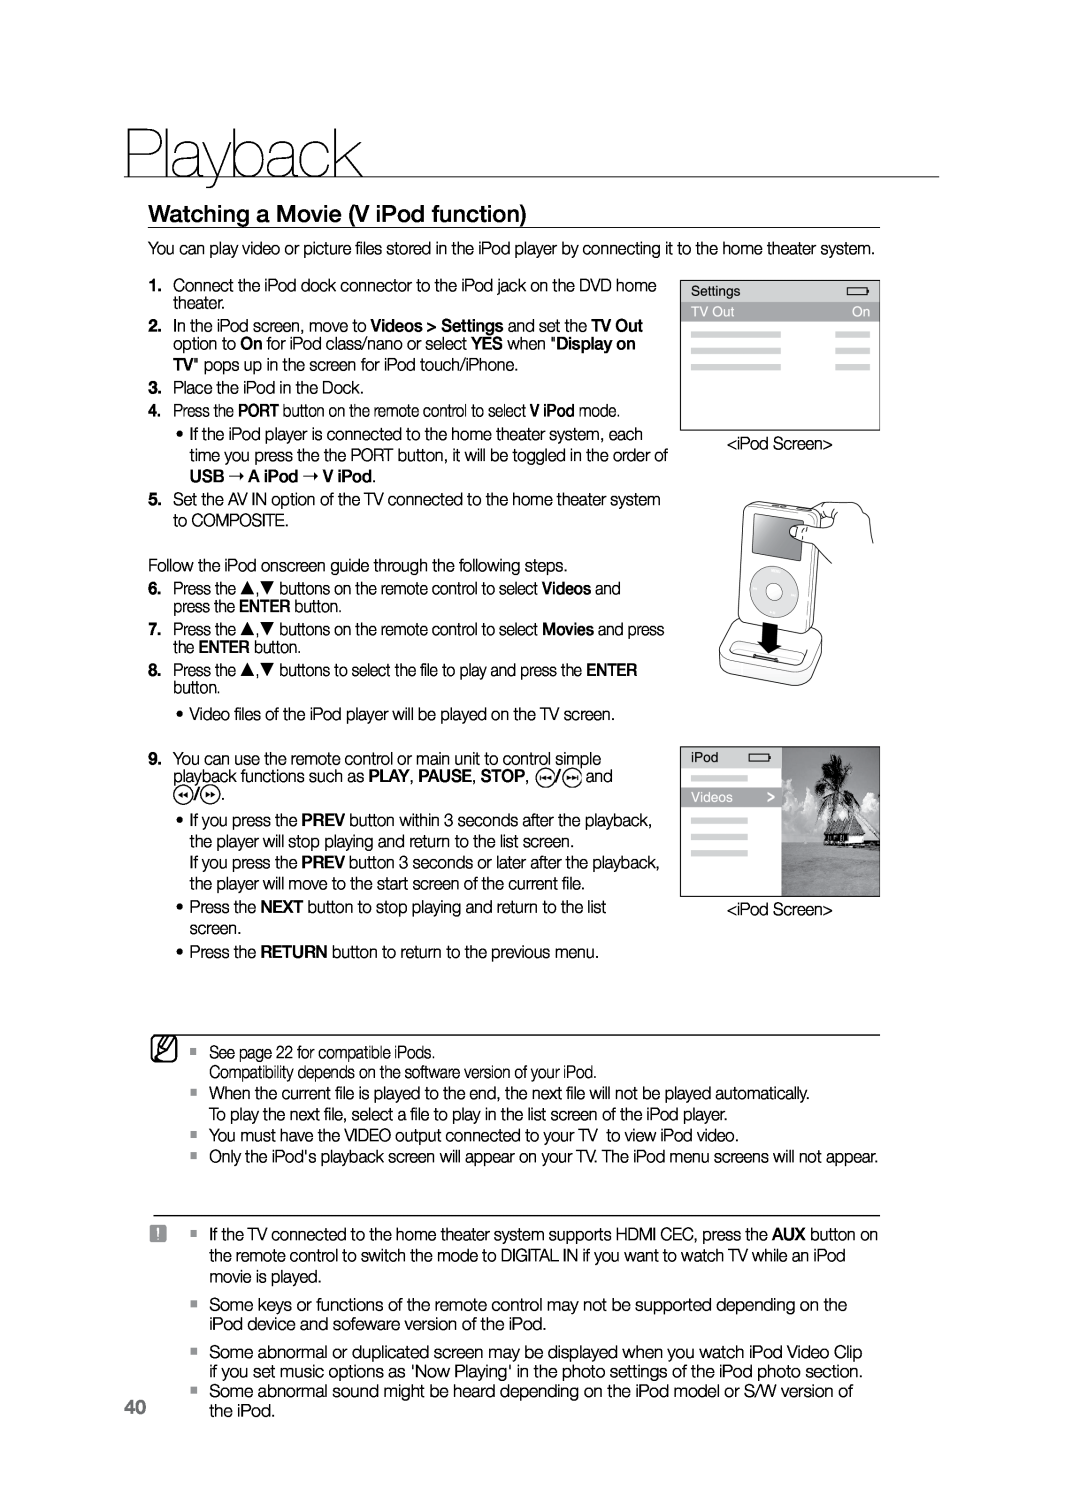 Samsung HT-Z221 user manual Watching a Movie V iPod function, Playback 